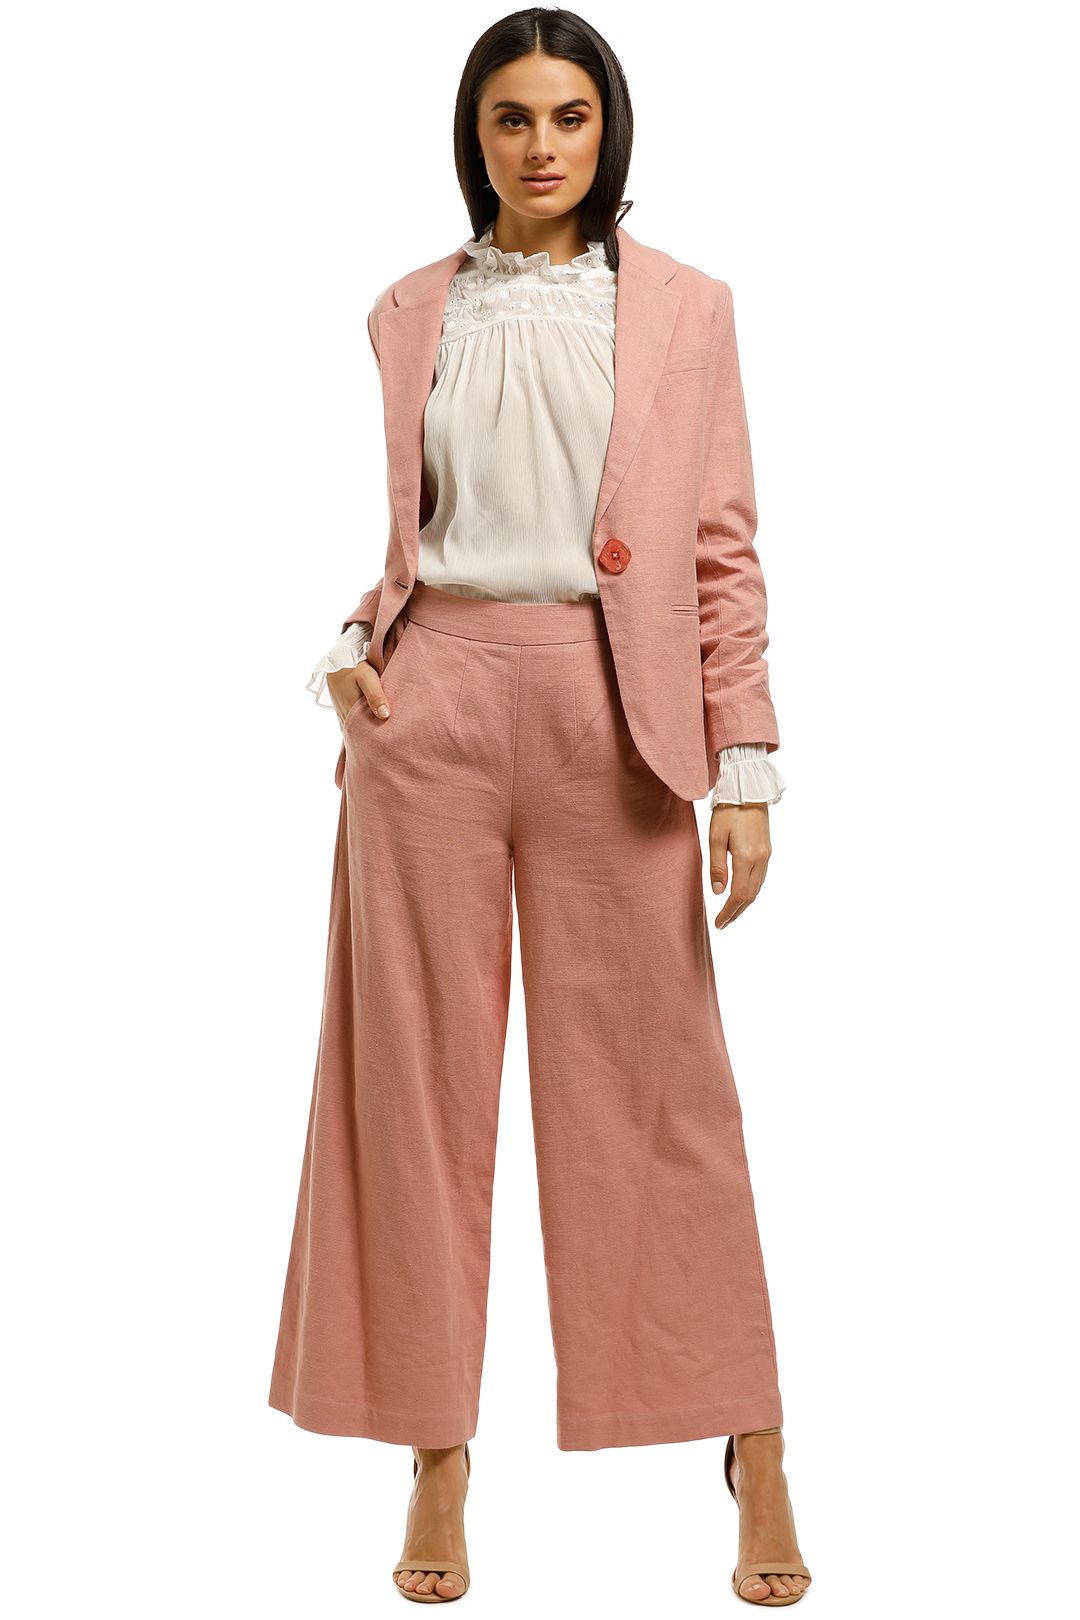 Ministry-Of-Style-Daybreak-Blazer-Pink-Front